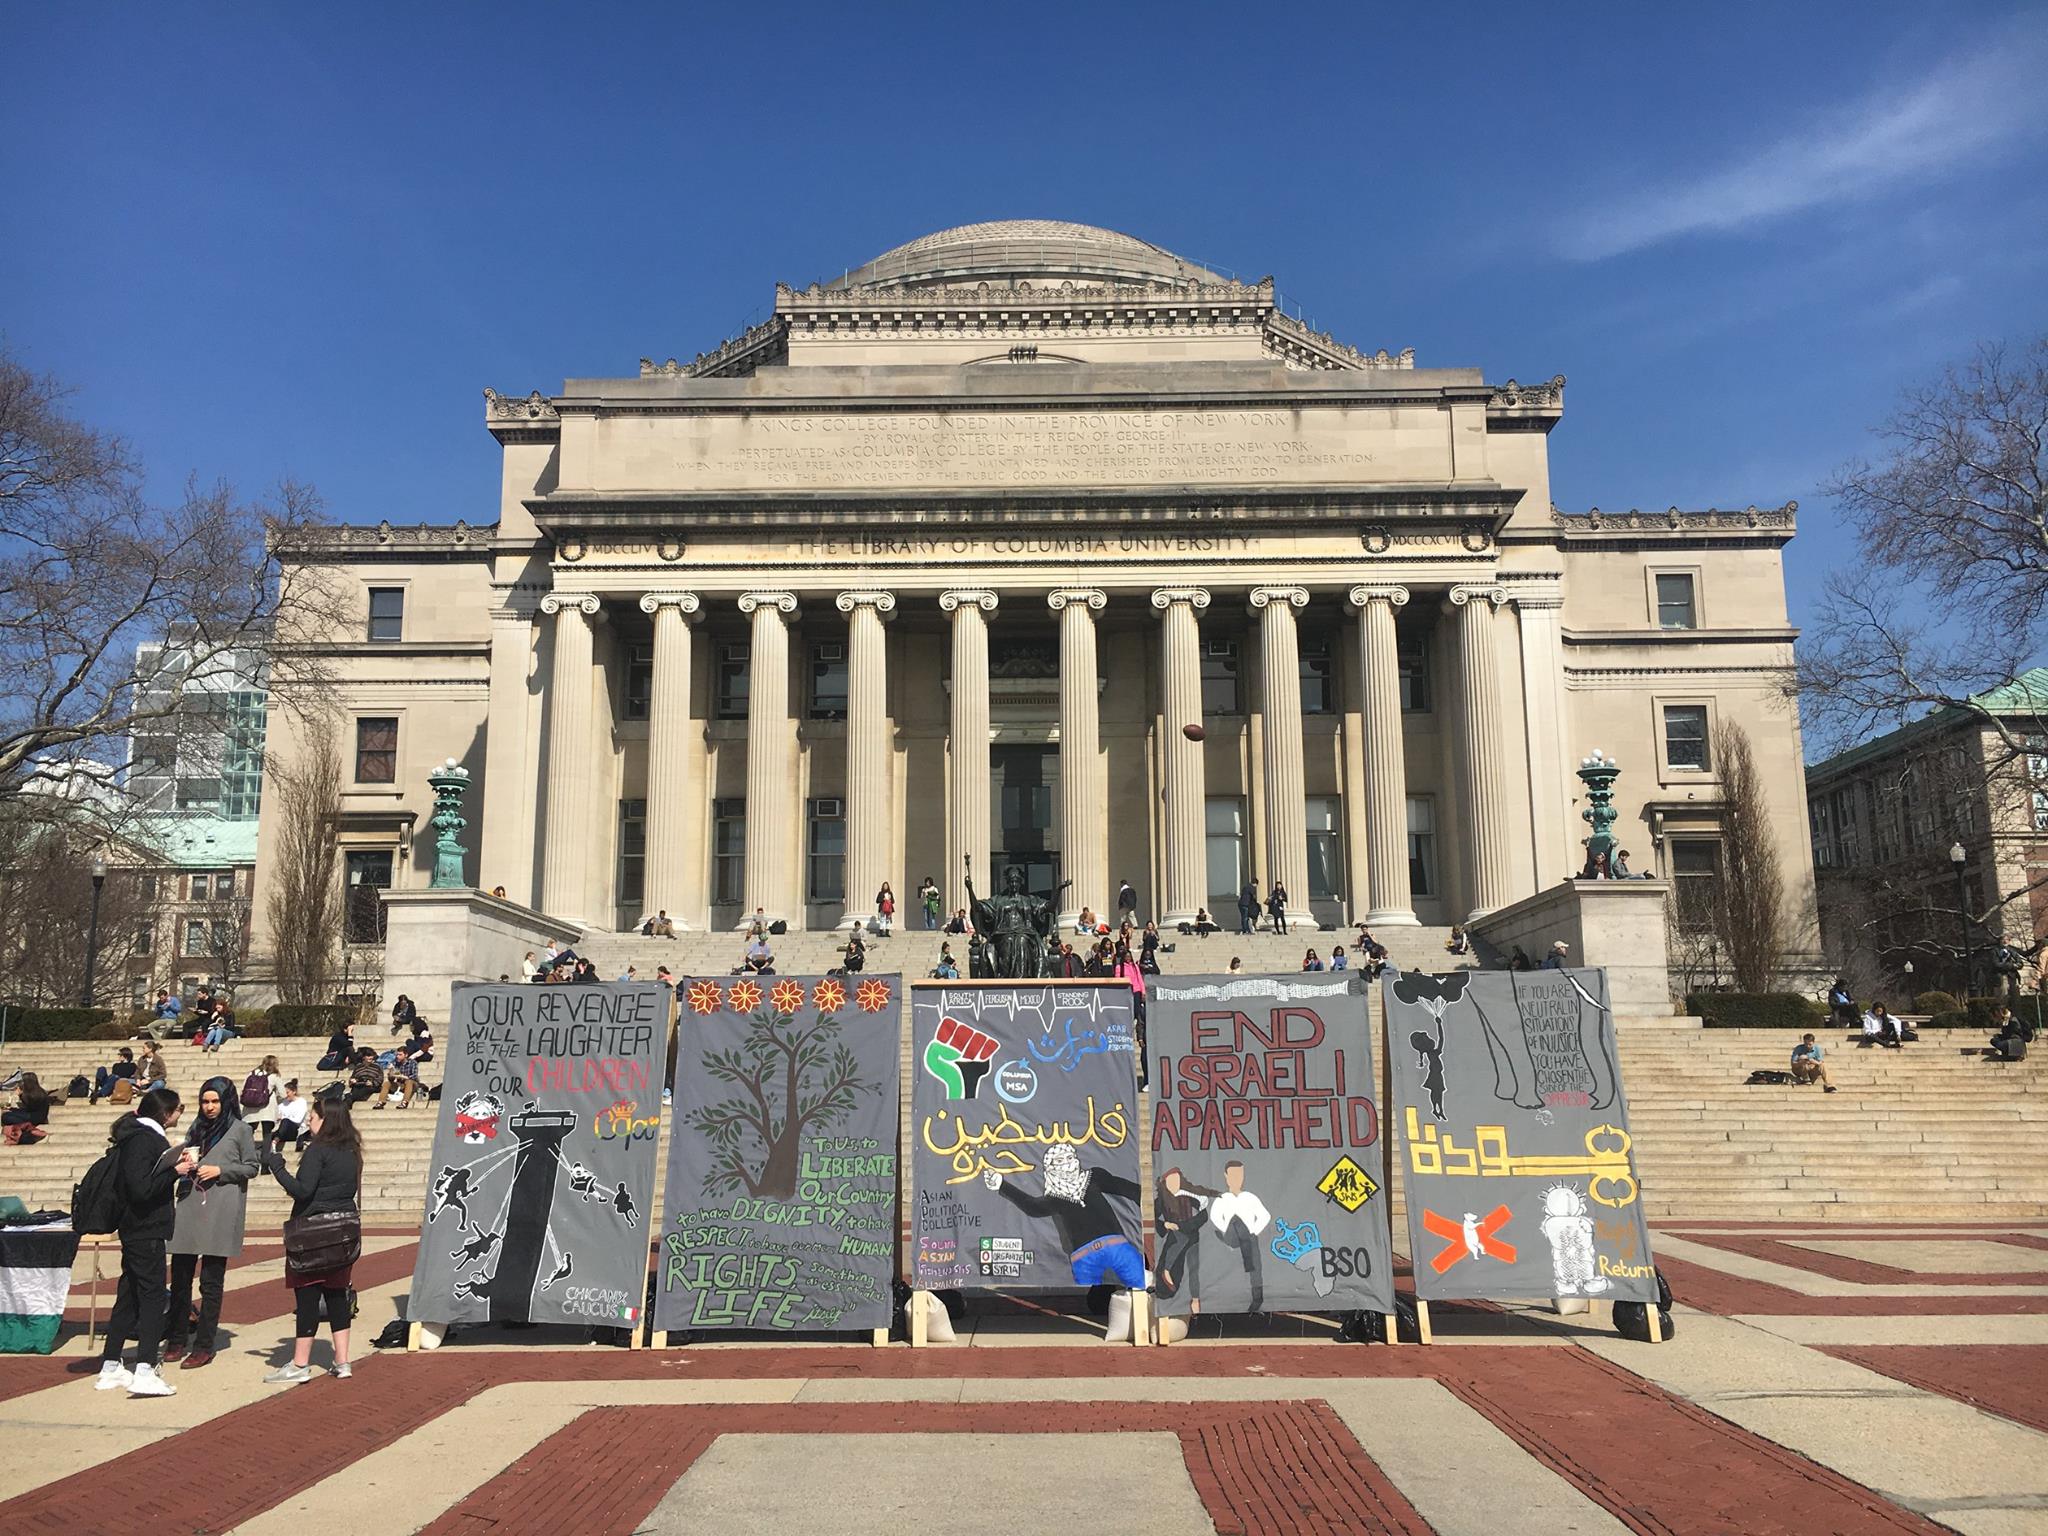 A photo from a past Israeli Apartheid Week (the first week of April) on Columbia's campus, organized by CSJP.